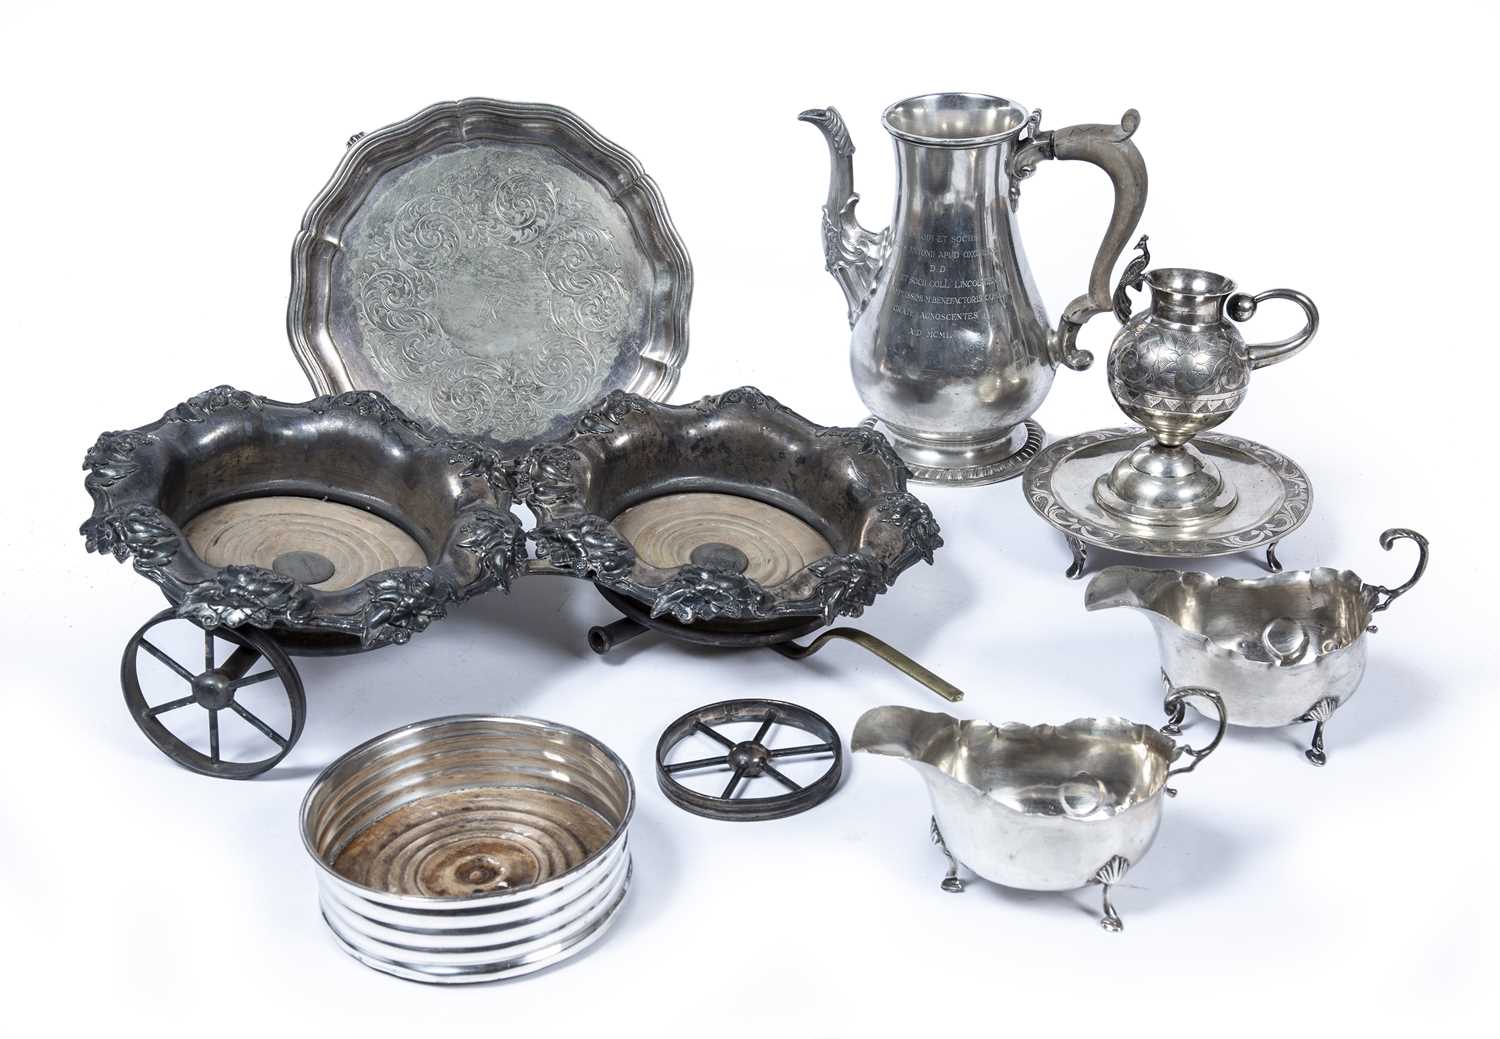 Collection of silver and silver plate consisting of a silver coffee pot, dedications to the body